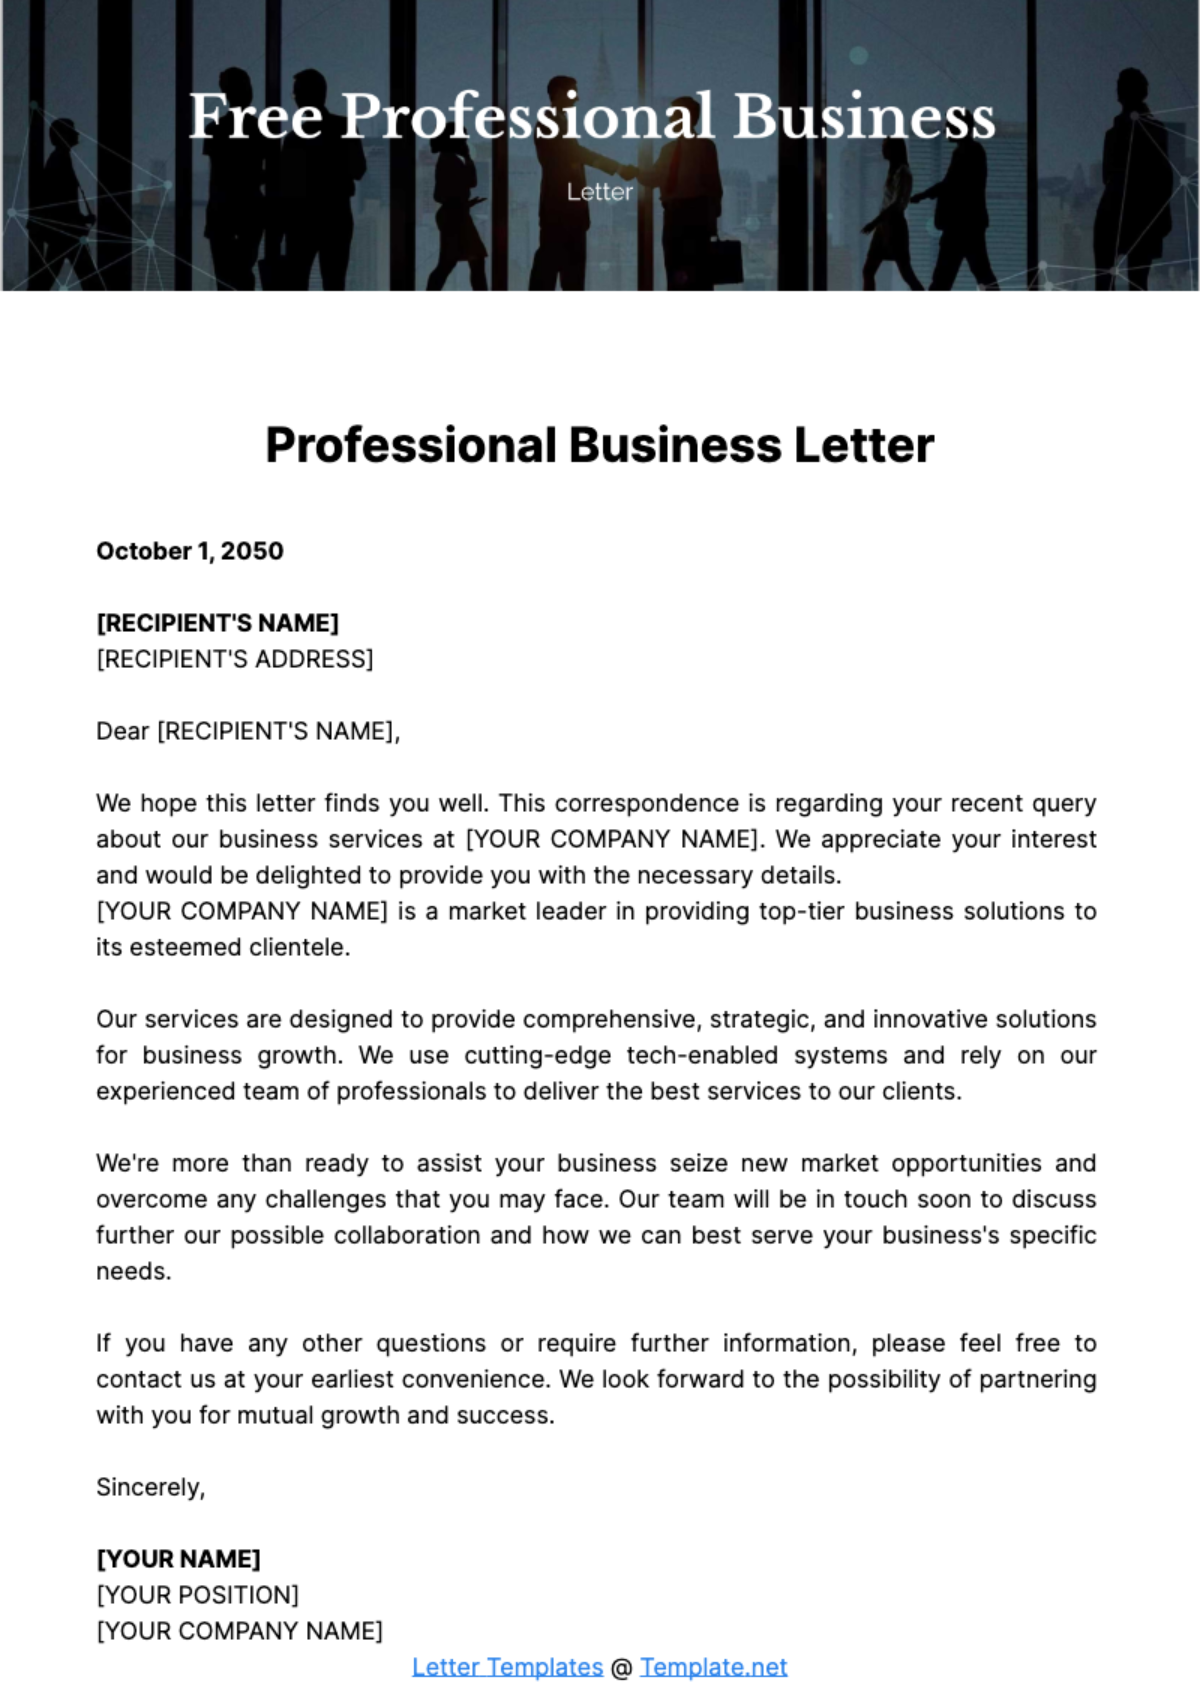 Free Professional Business Letter Template